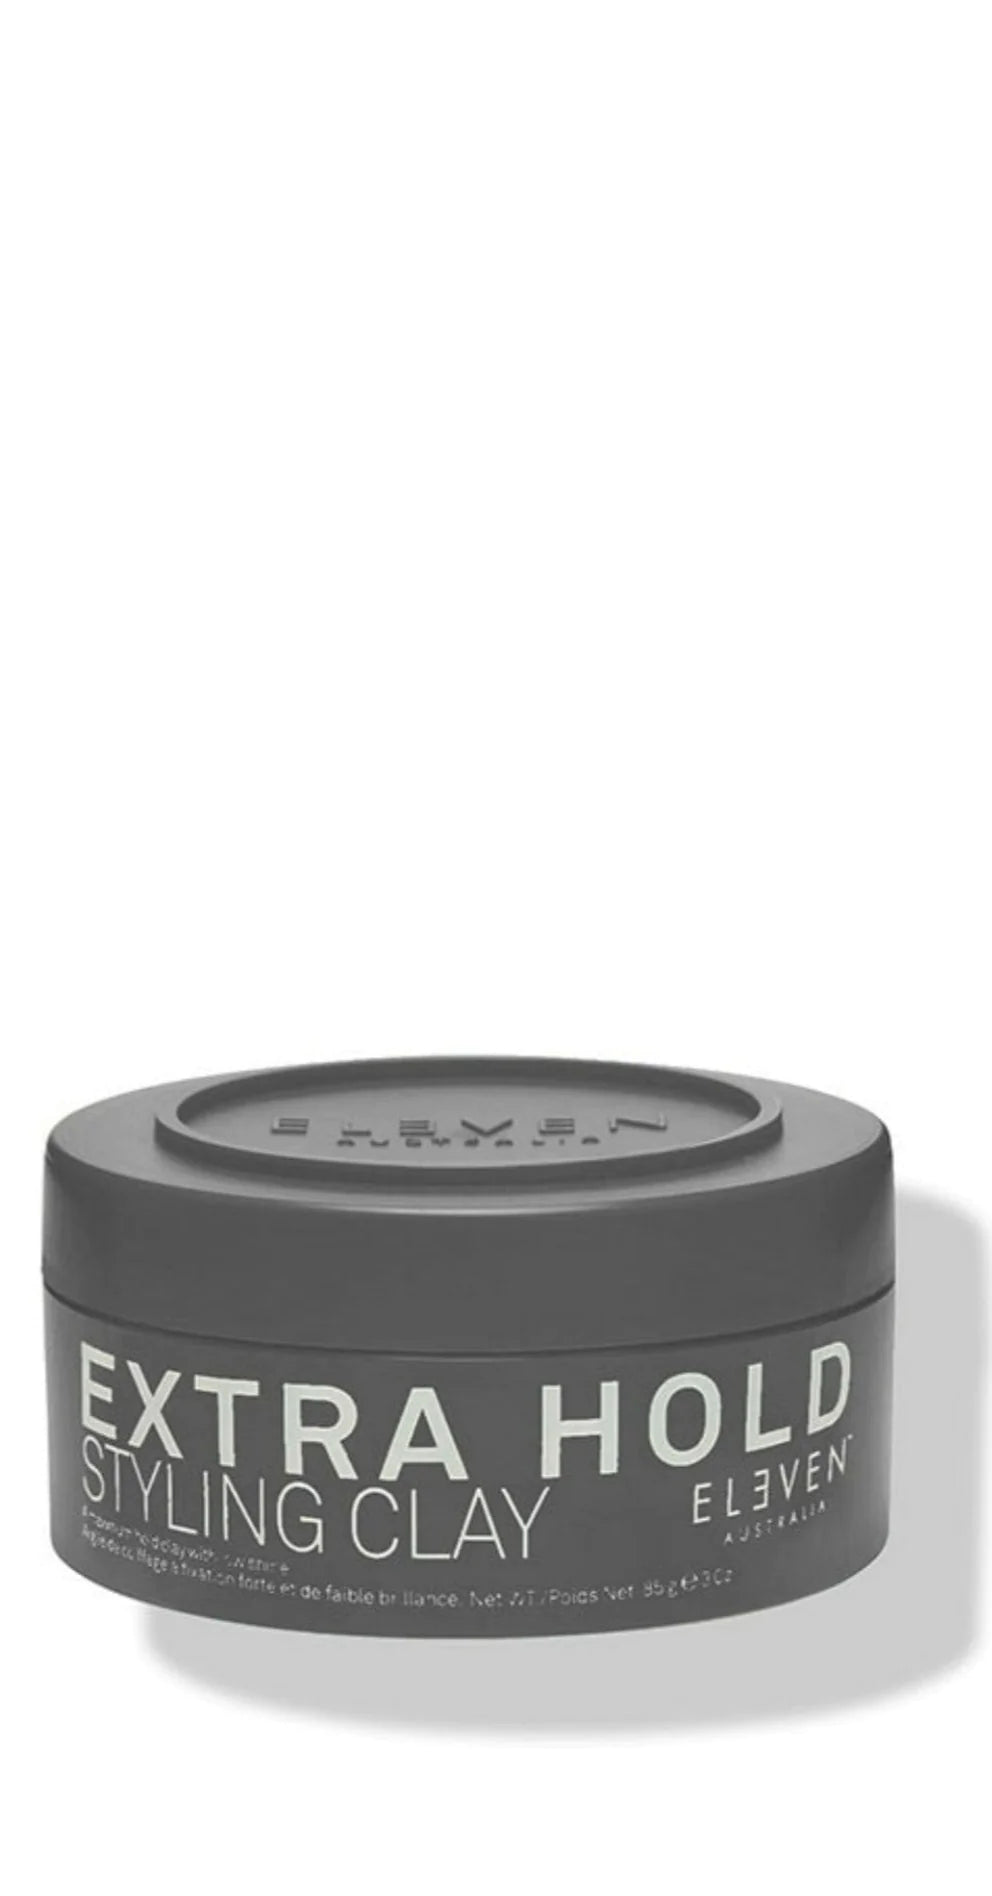 Eleven Australia- Extra Hold Styling Clay